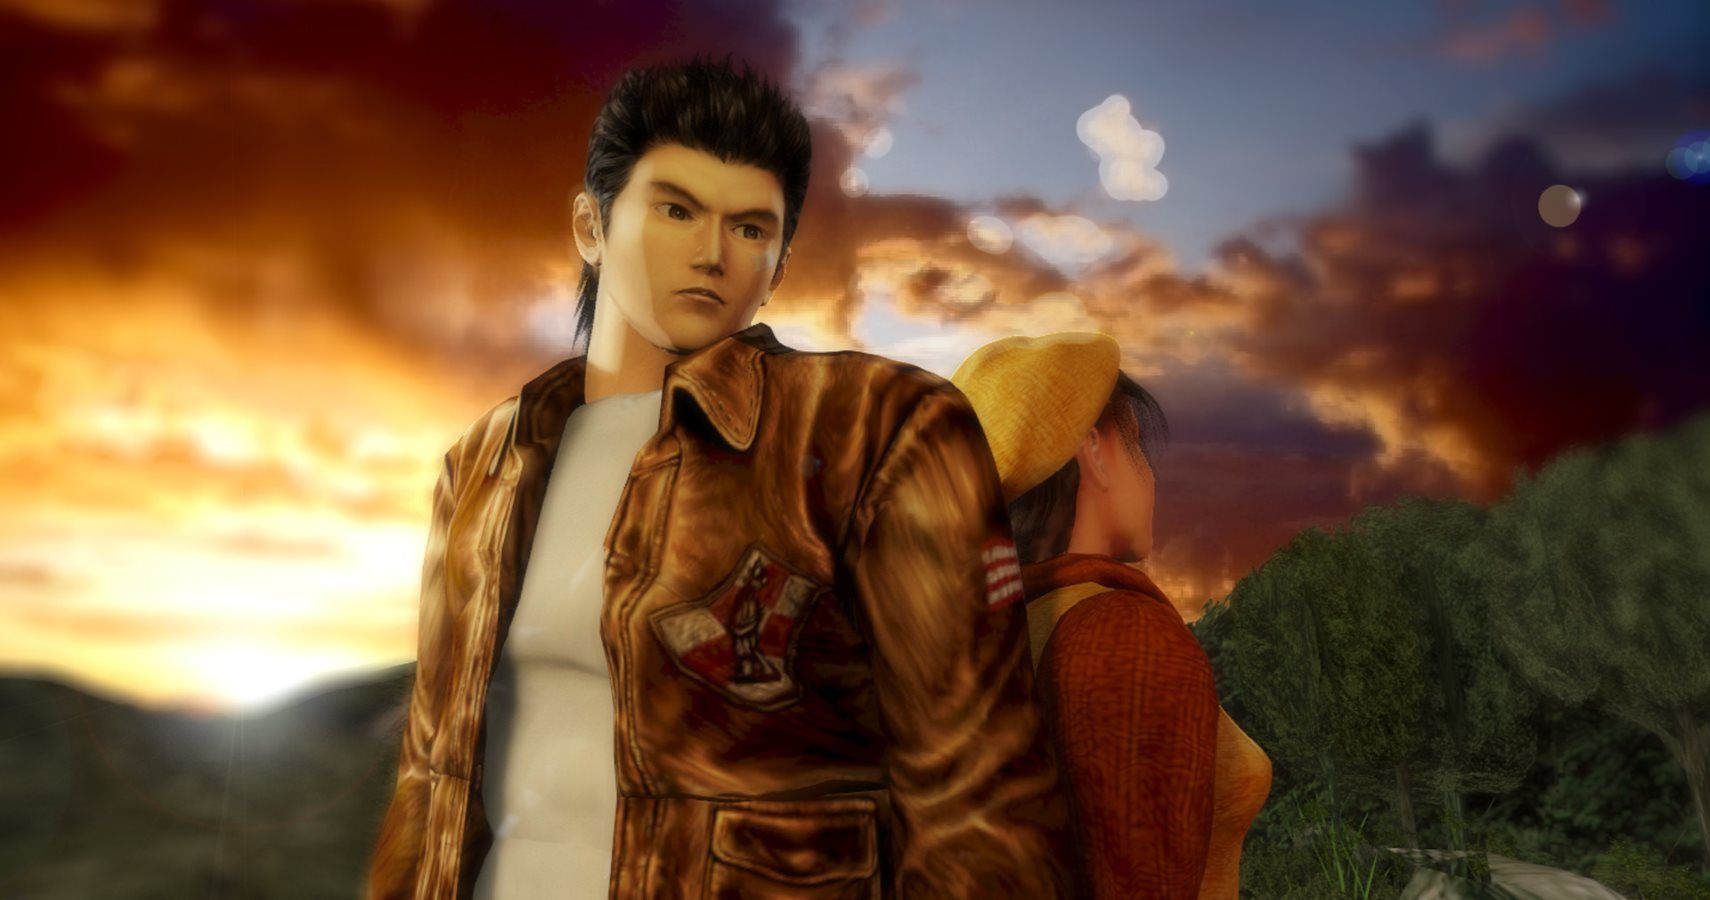 Shenmue 3 Pushed Back To 2019 (Probably To Rework Duck Racing Minigame)